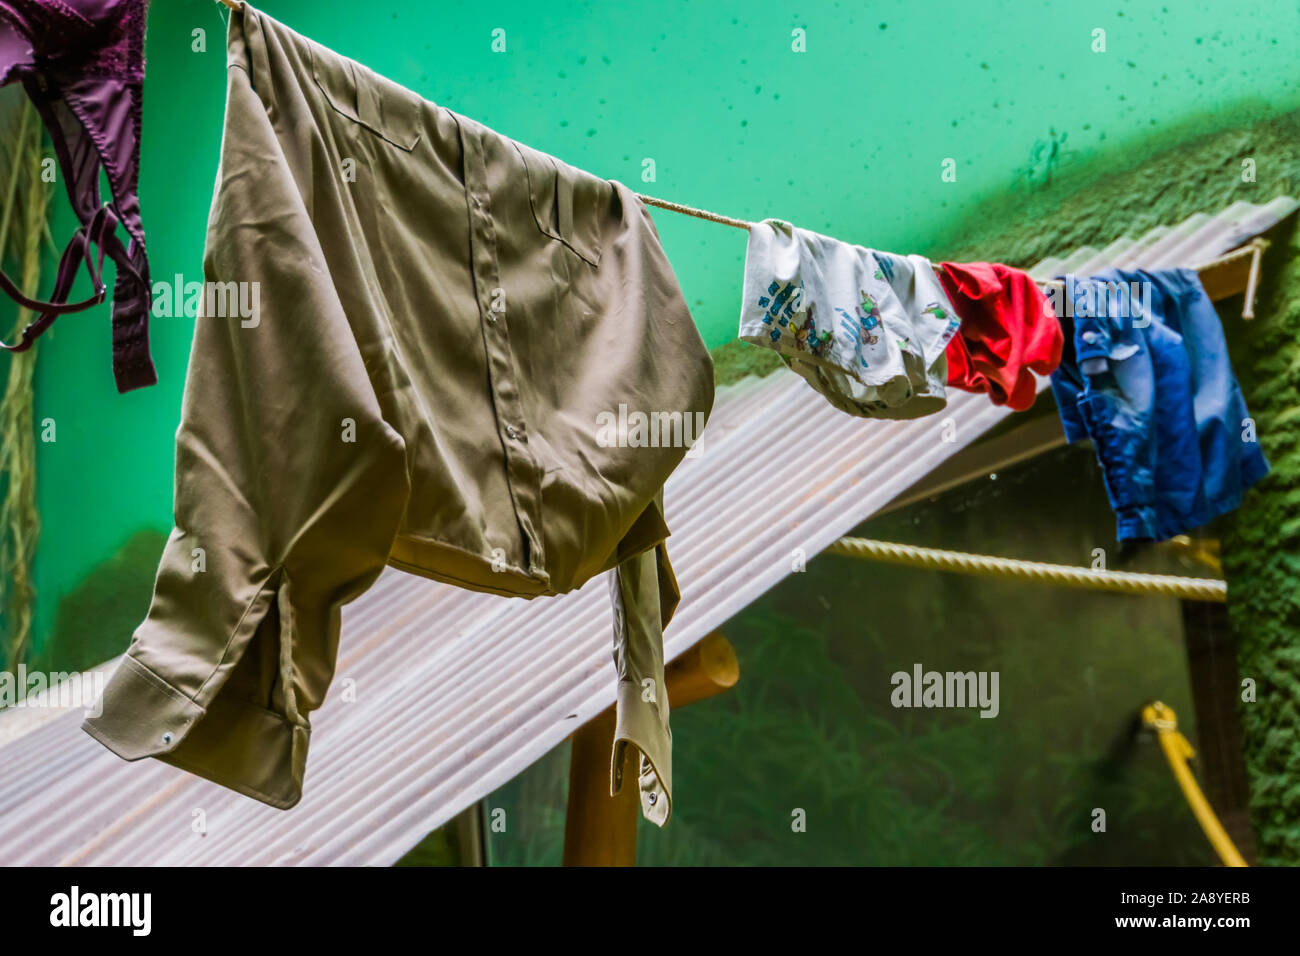 clean laundry hanging to dry on a wash line, natural drying method Stock Photo